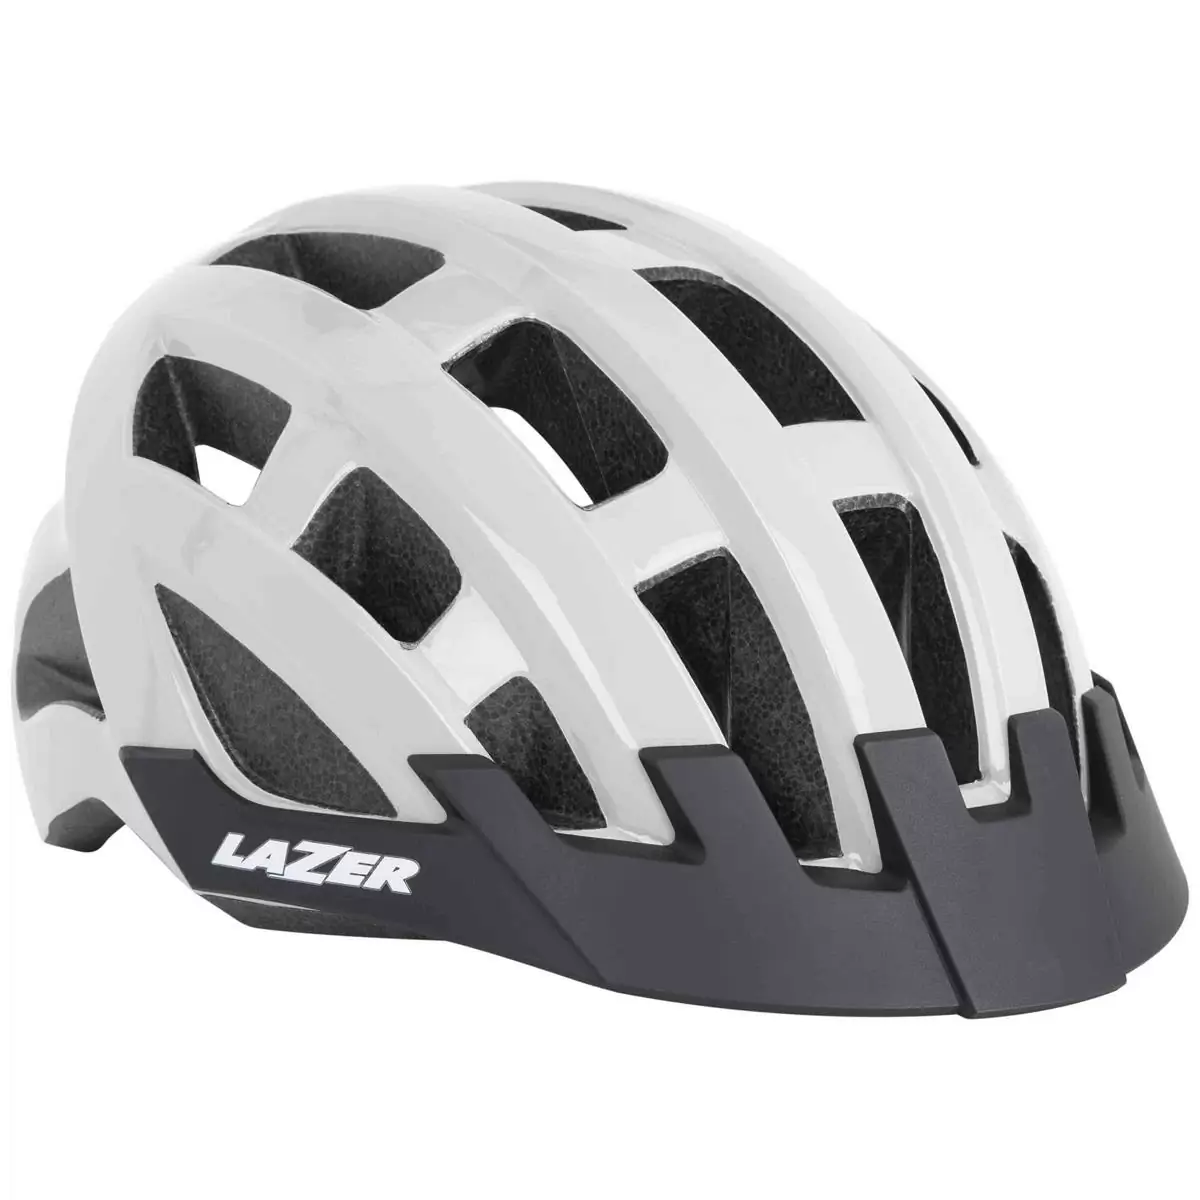 Helmet compact white one size (54-61) - image